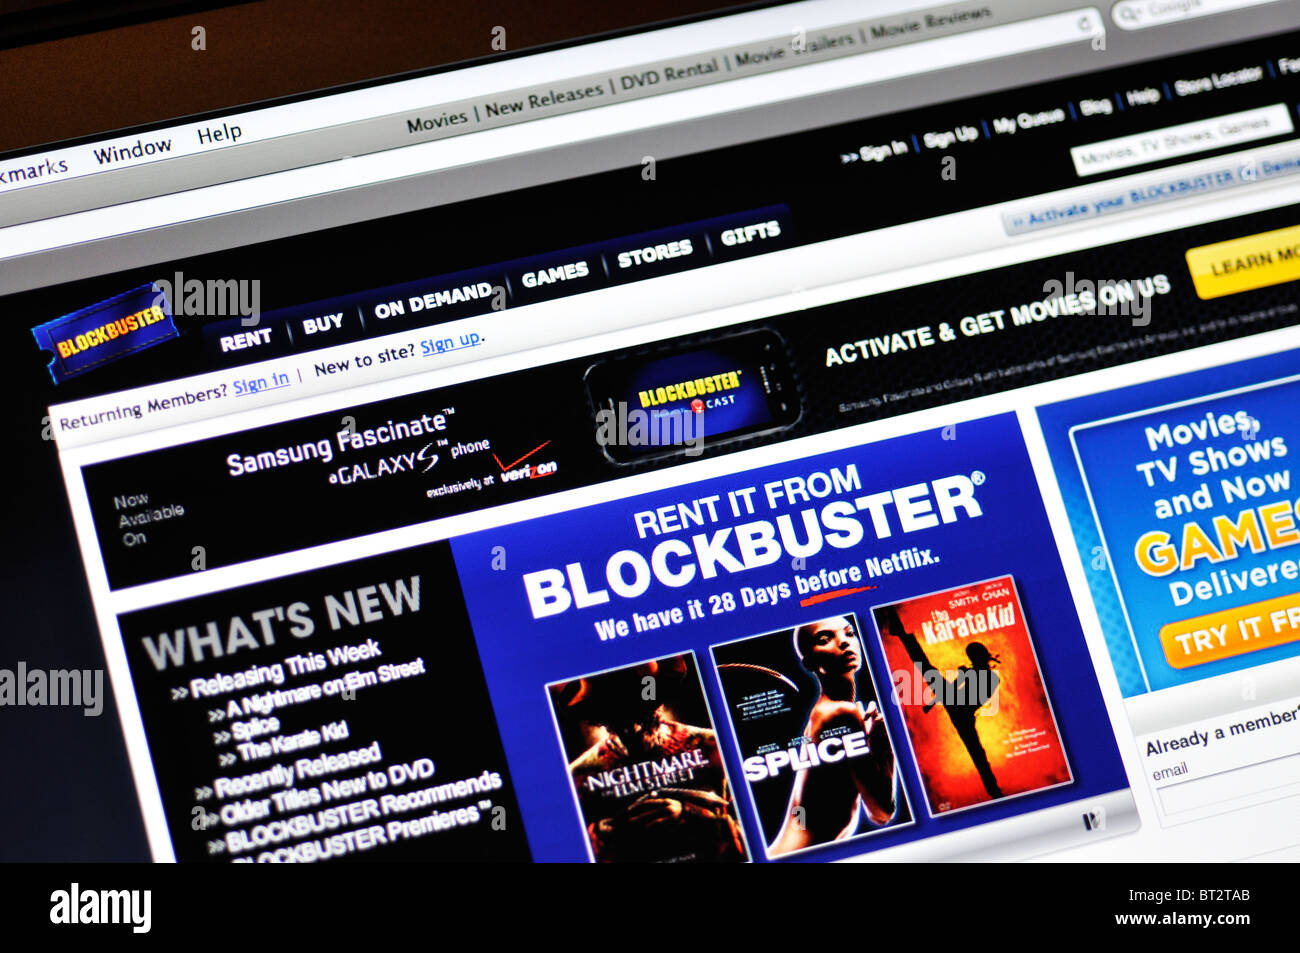 Blockbuster website - online movie and video game rental Stock Photo